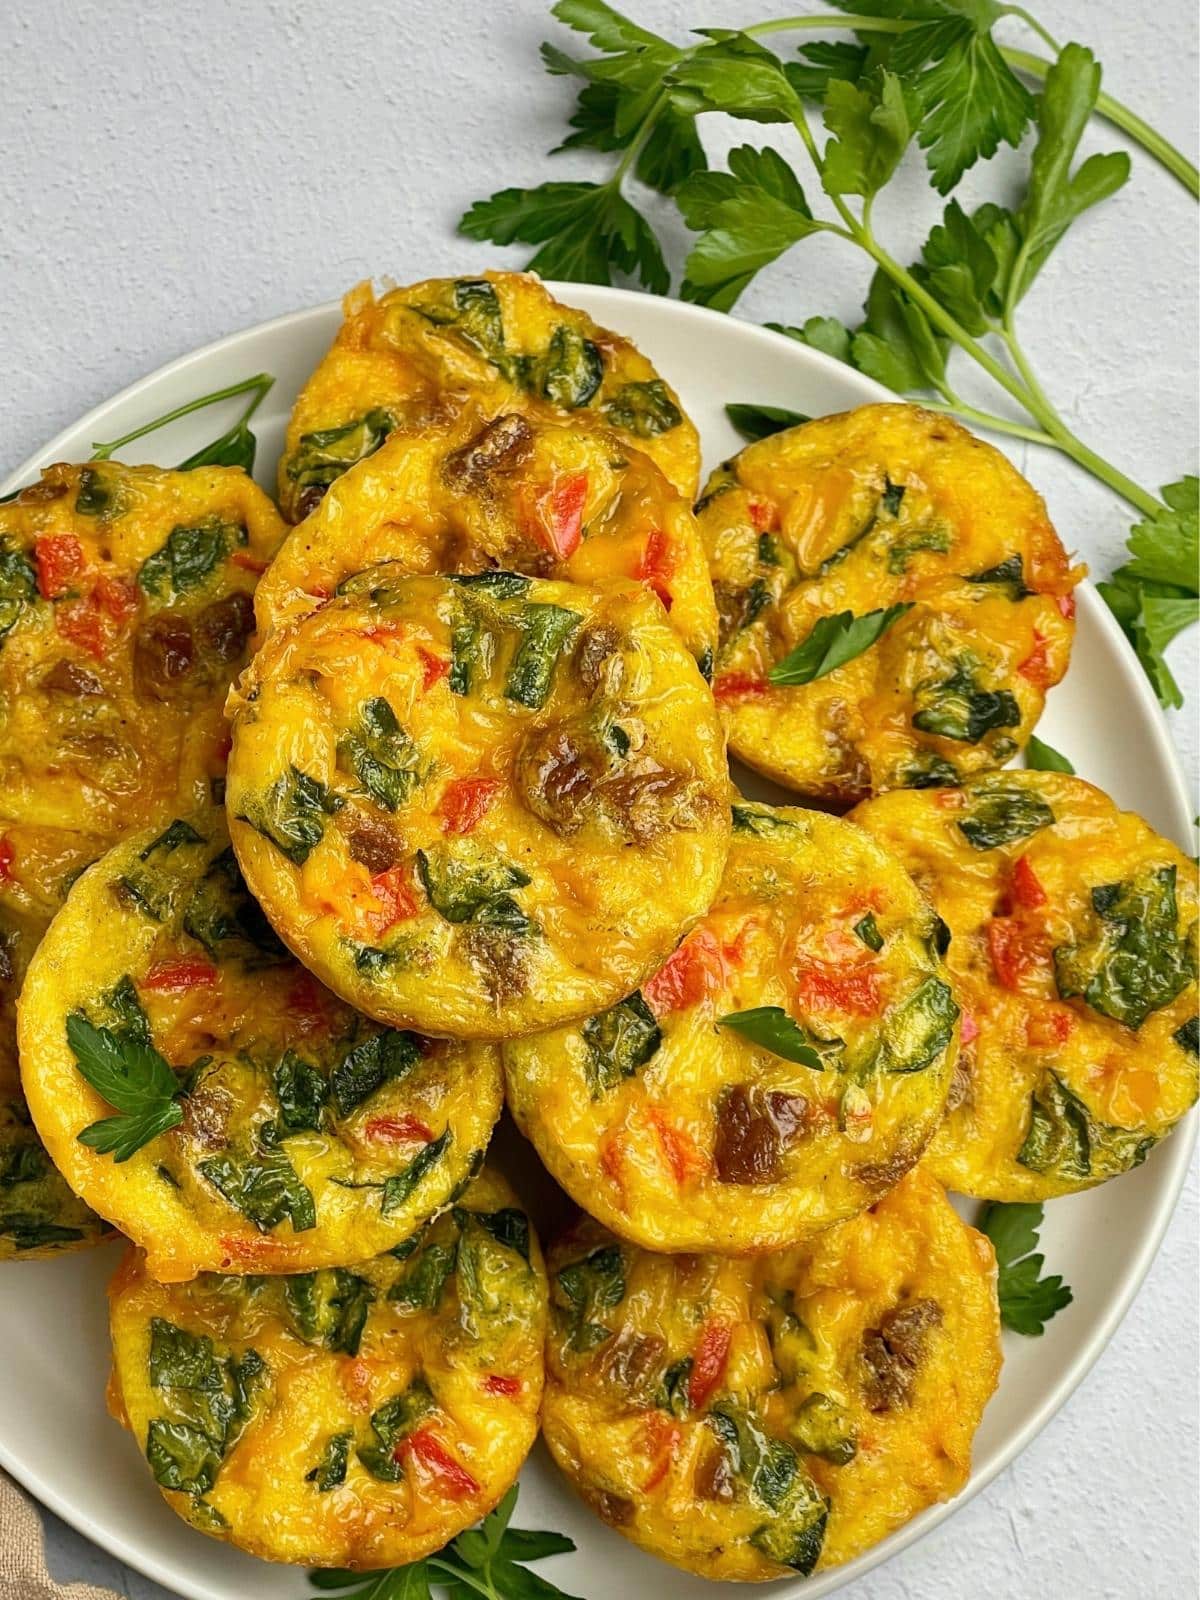 Egg muffins with veggies.